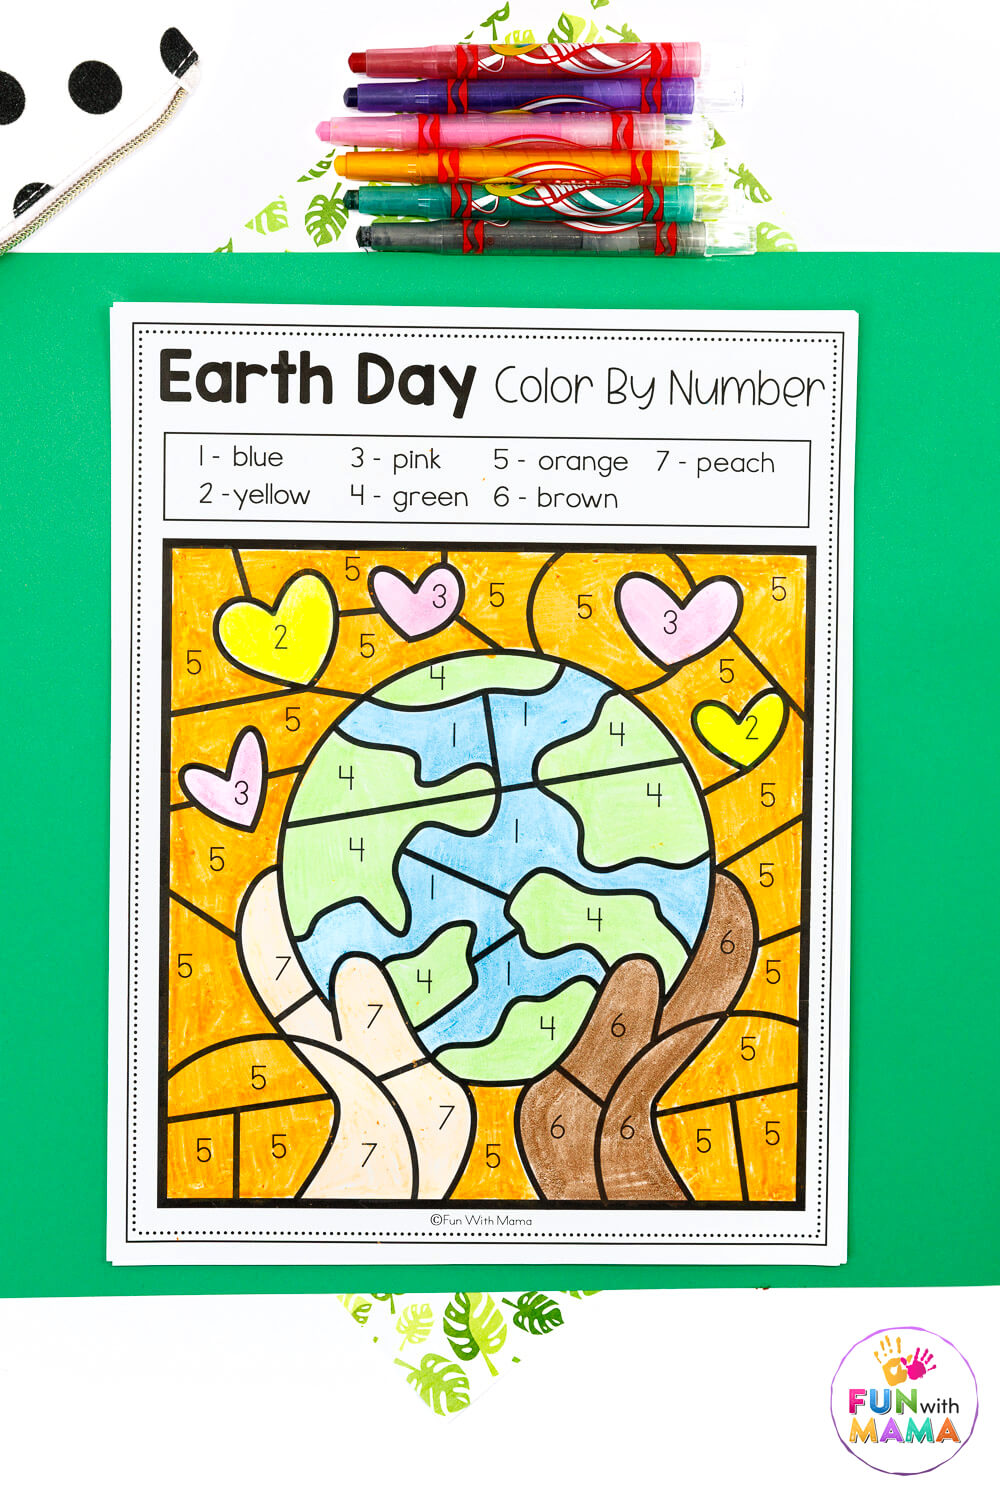 Earth day color by number earth and hands